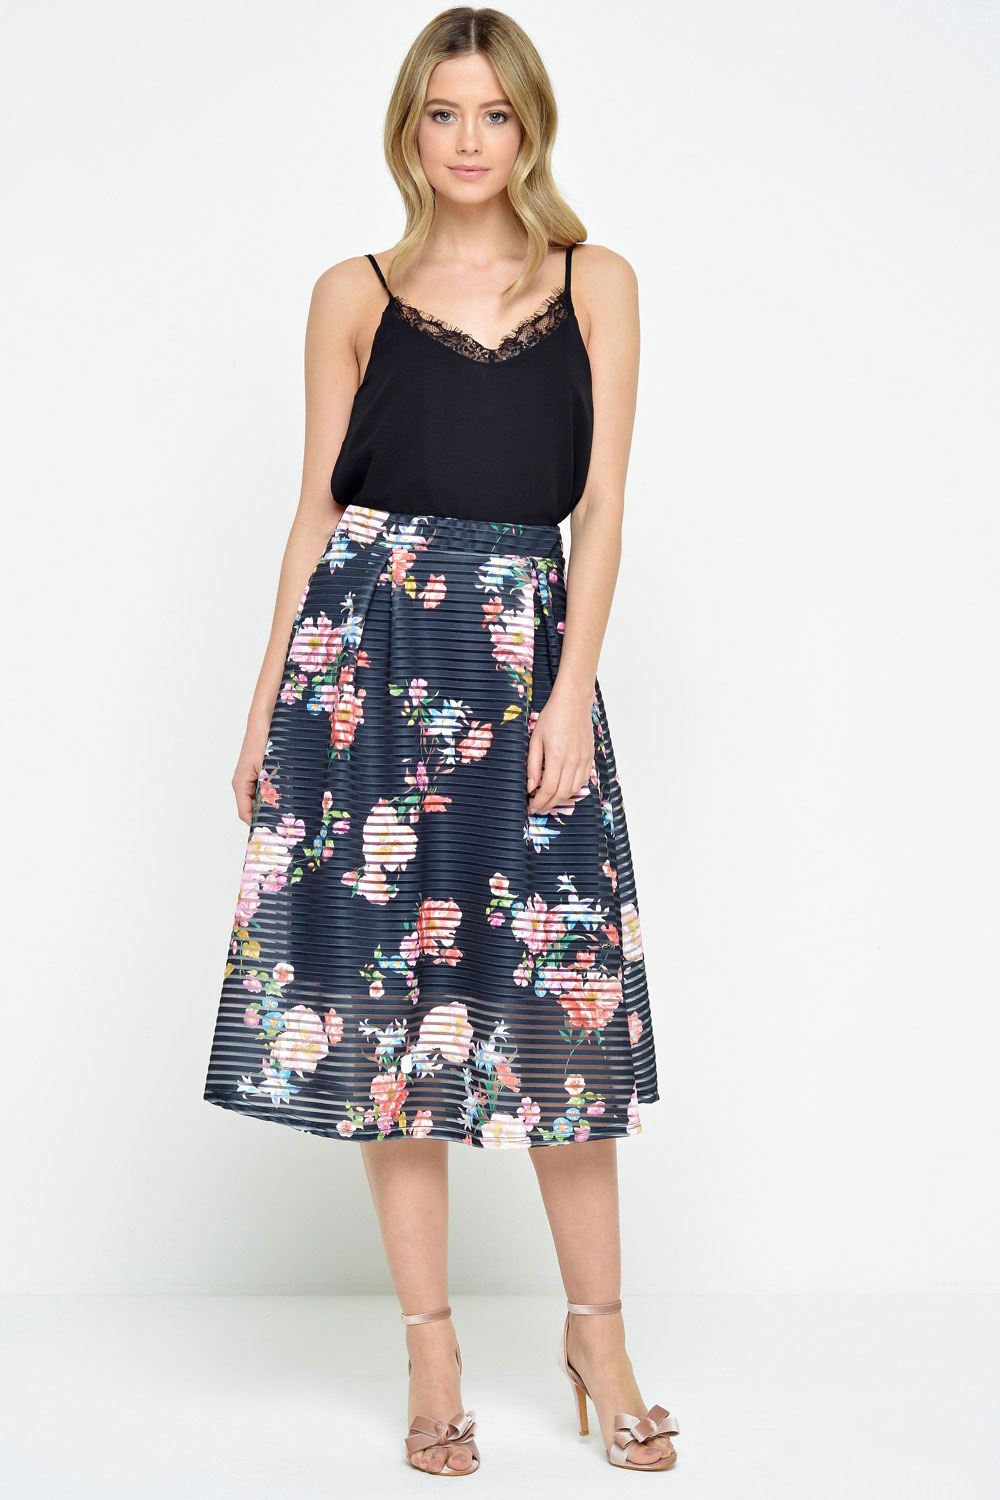 Ayanapa Leanna Floral Print Pleat Skirt in Black | iCLOTHING - iCLOTHING